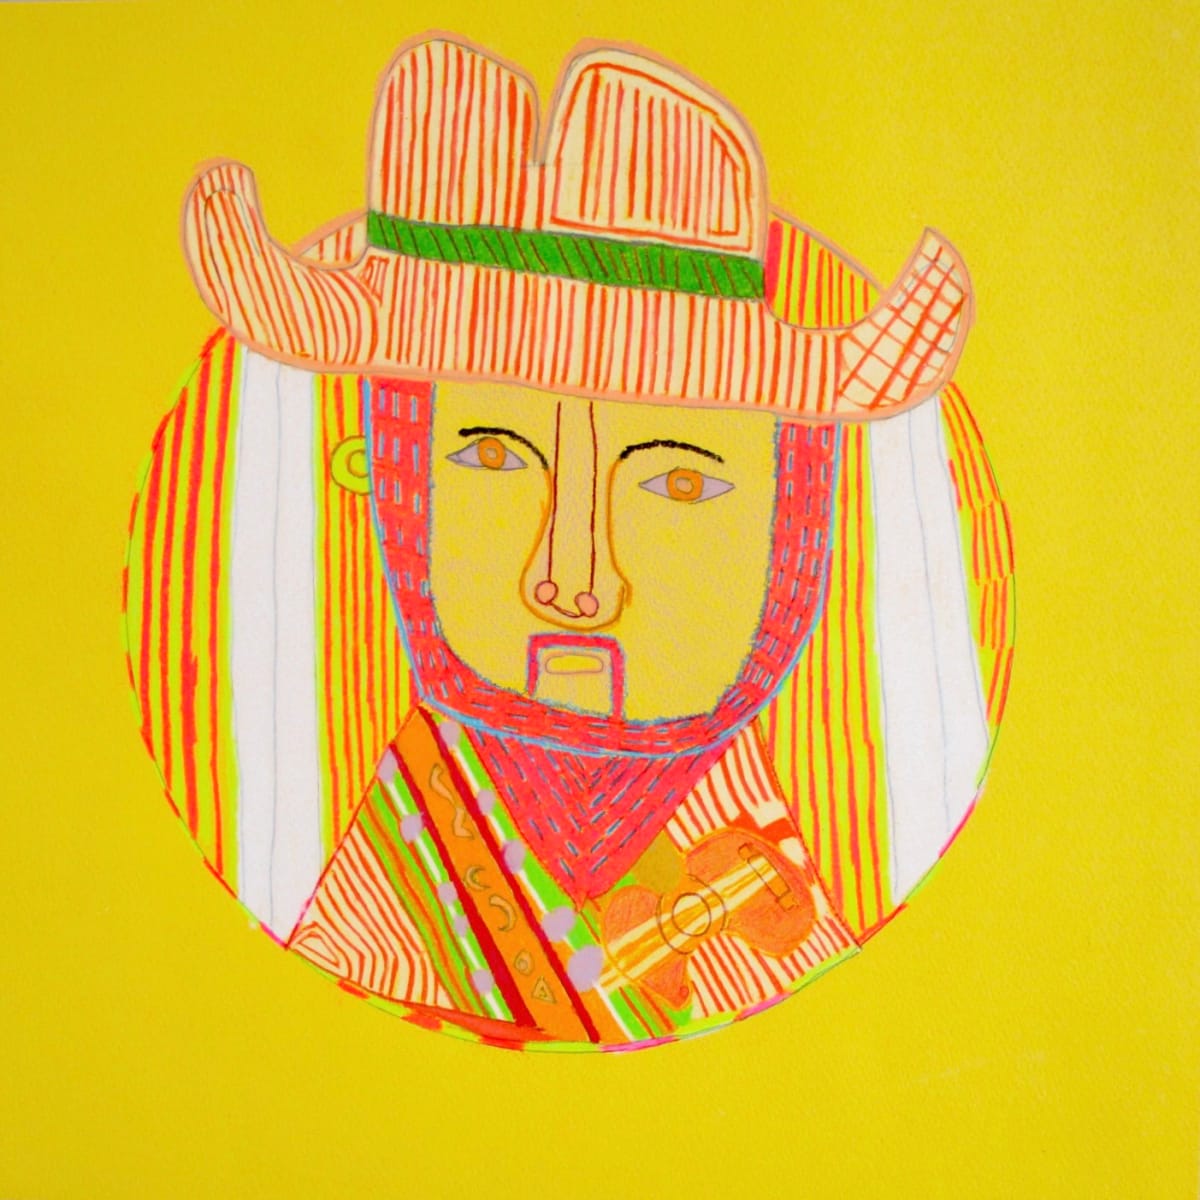 Chris Stapleton in Yellow by Gill Hines 